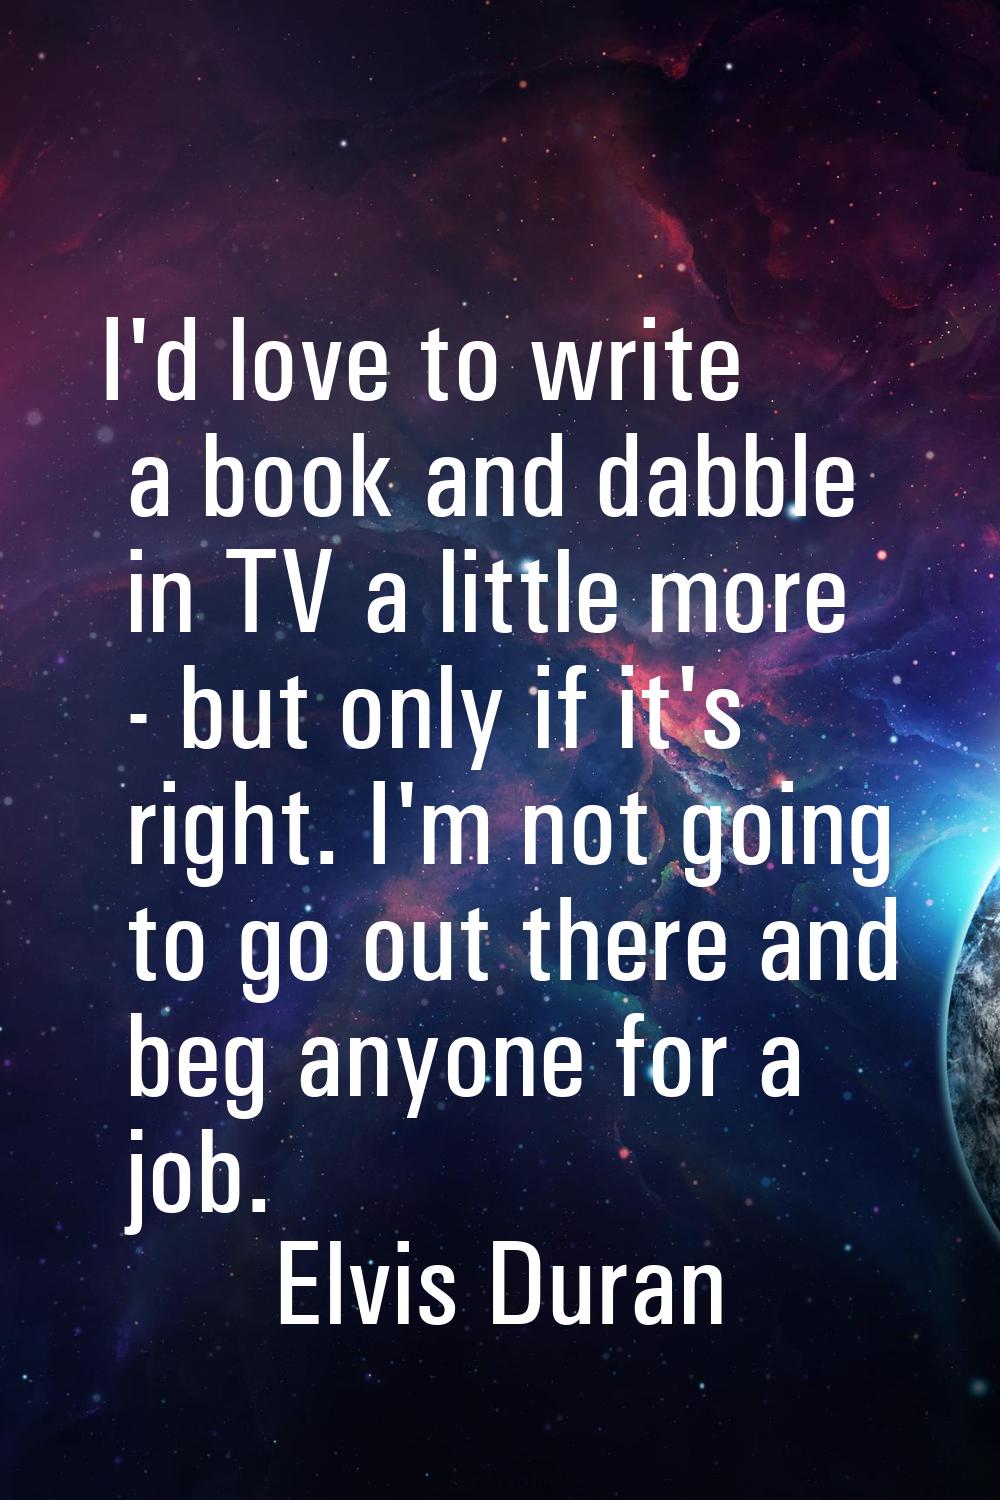 I'd love to write a book and dabble in TV a little more - but only if it's right. I'm not going to 